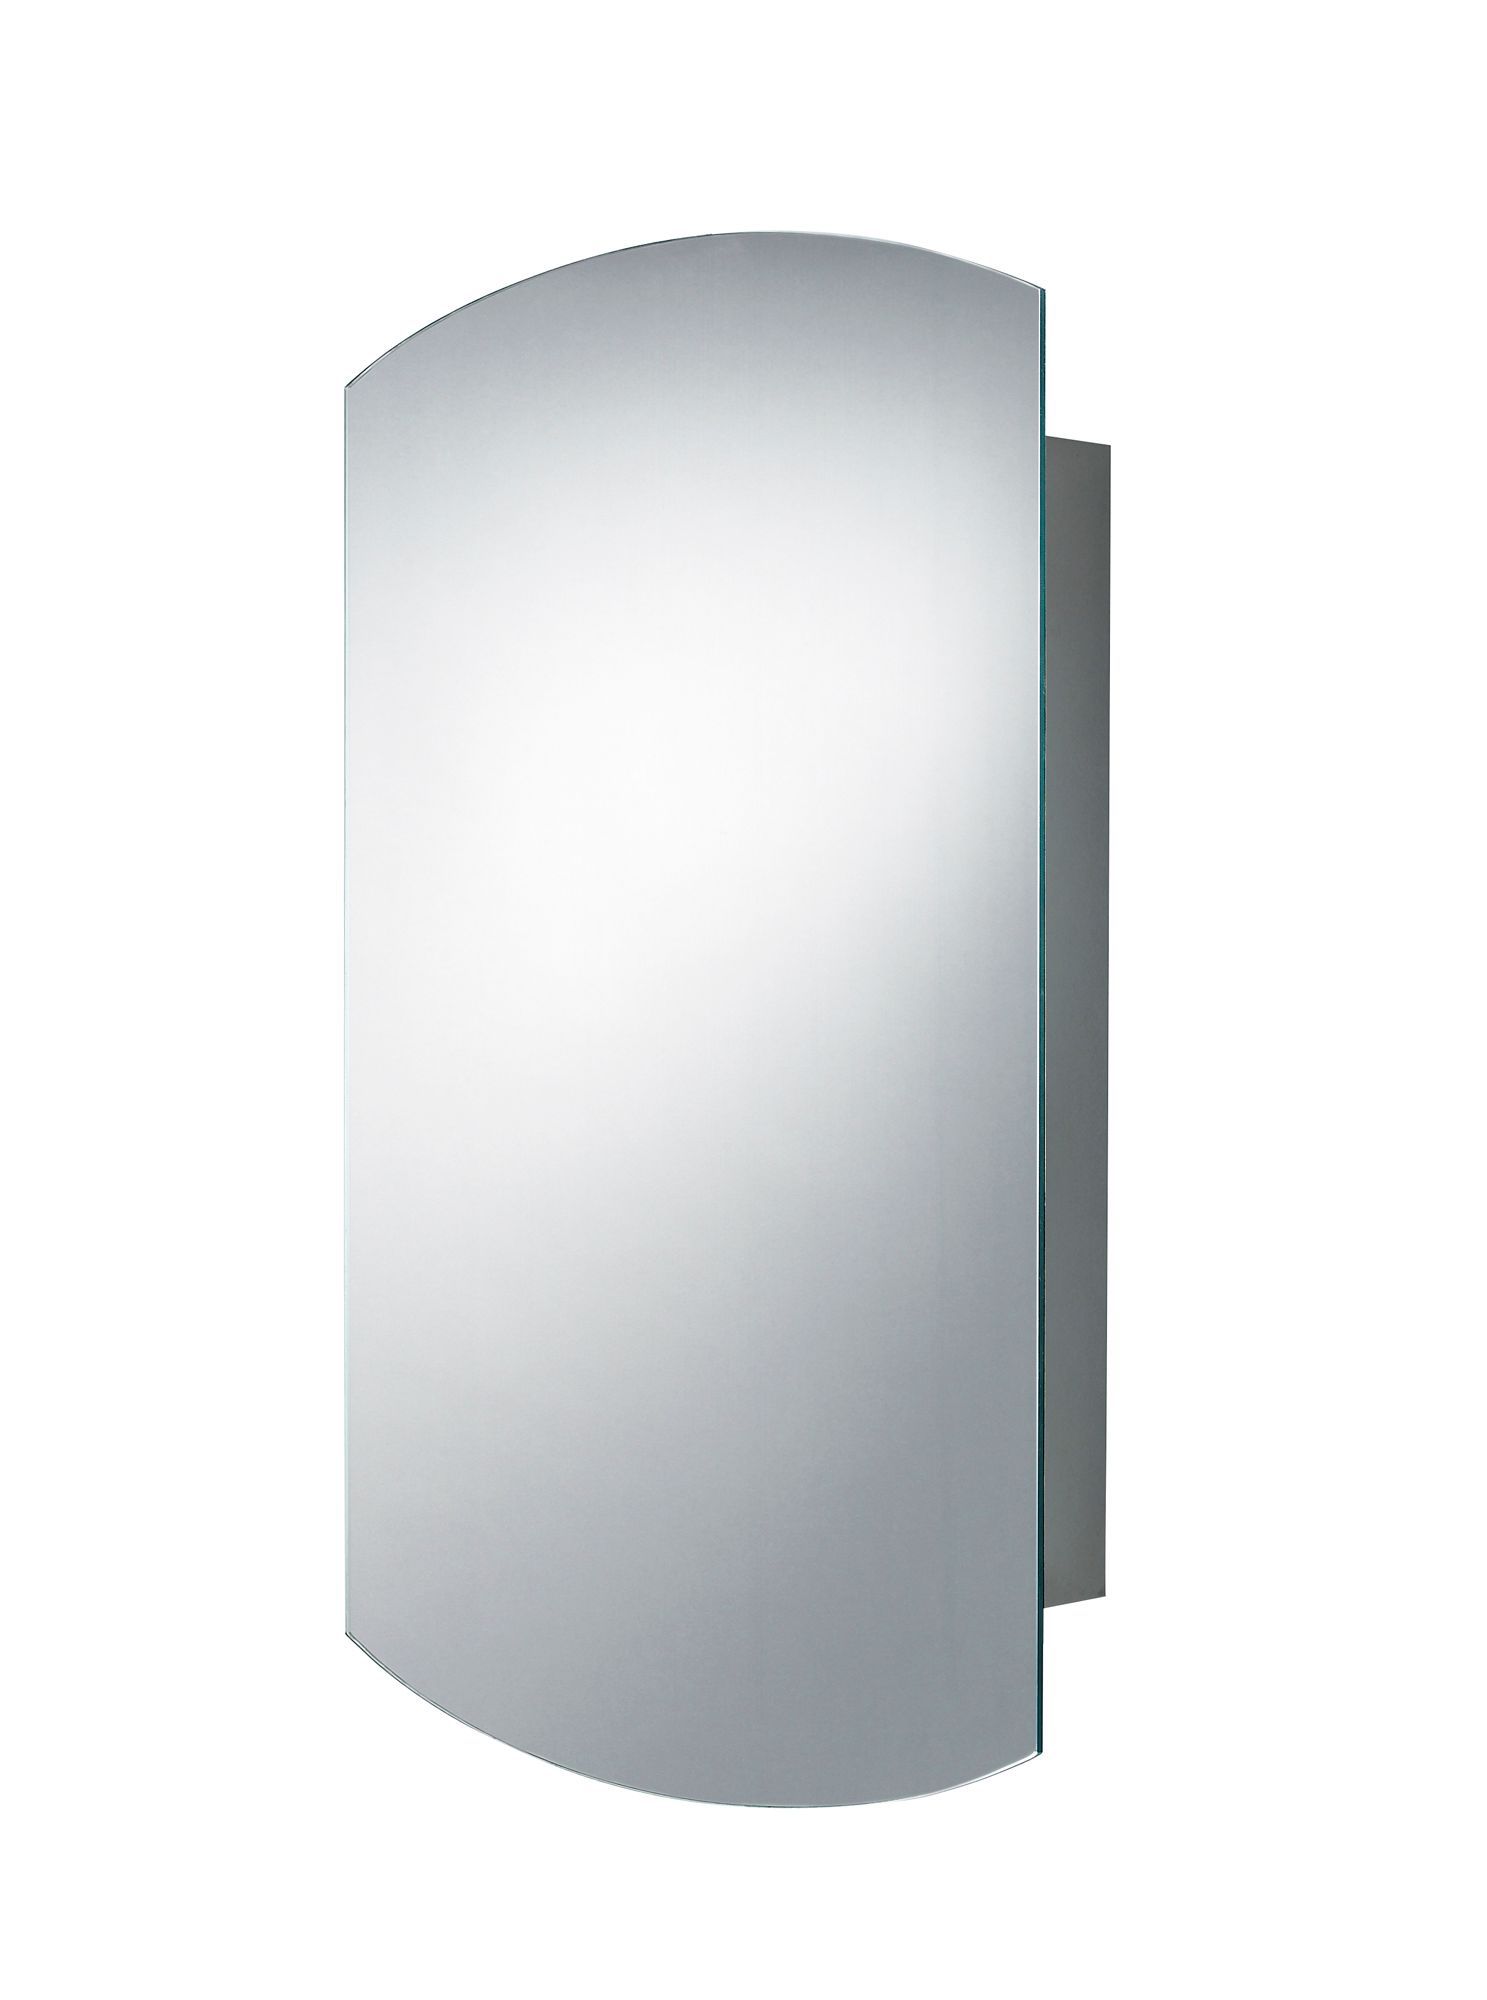 B&Q Fonteno Lozenge shaped Silver effect Single Cabinet with Mirrored door (W)400mm (H)650mm